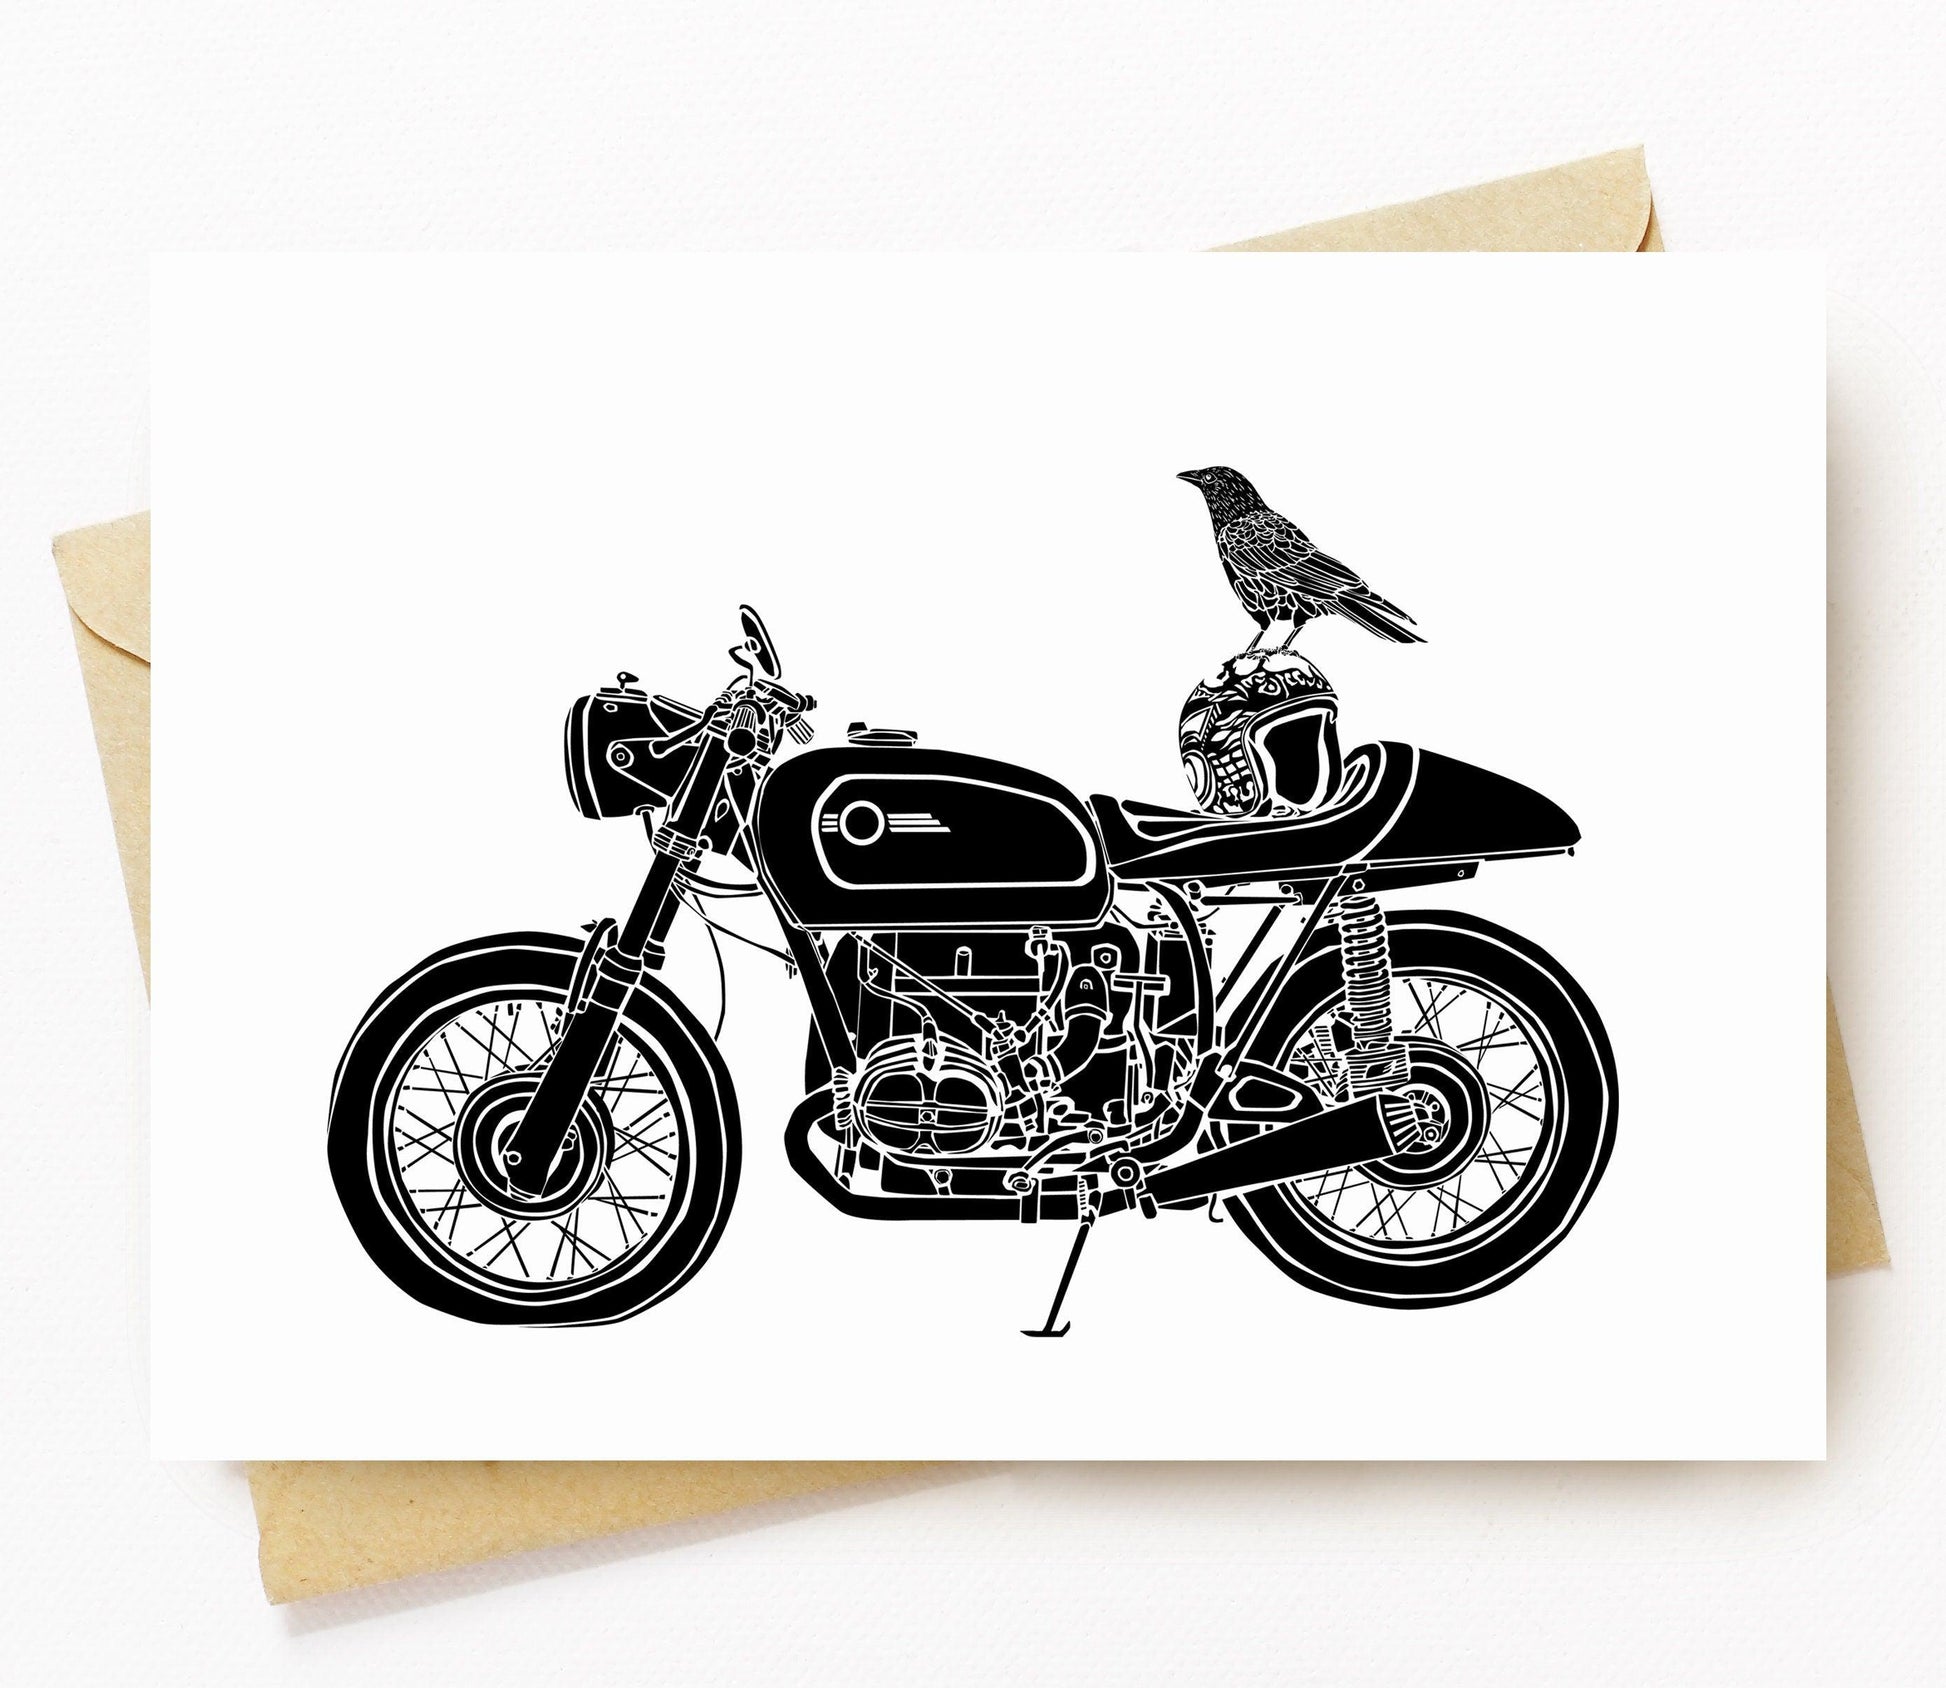 BellavanceInk: Greeting Card With Raven Sitting Upon A Cafe Racer Motorcycle 5 x 7 Inches - BellavanceInk